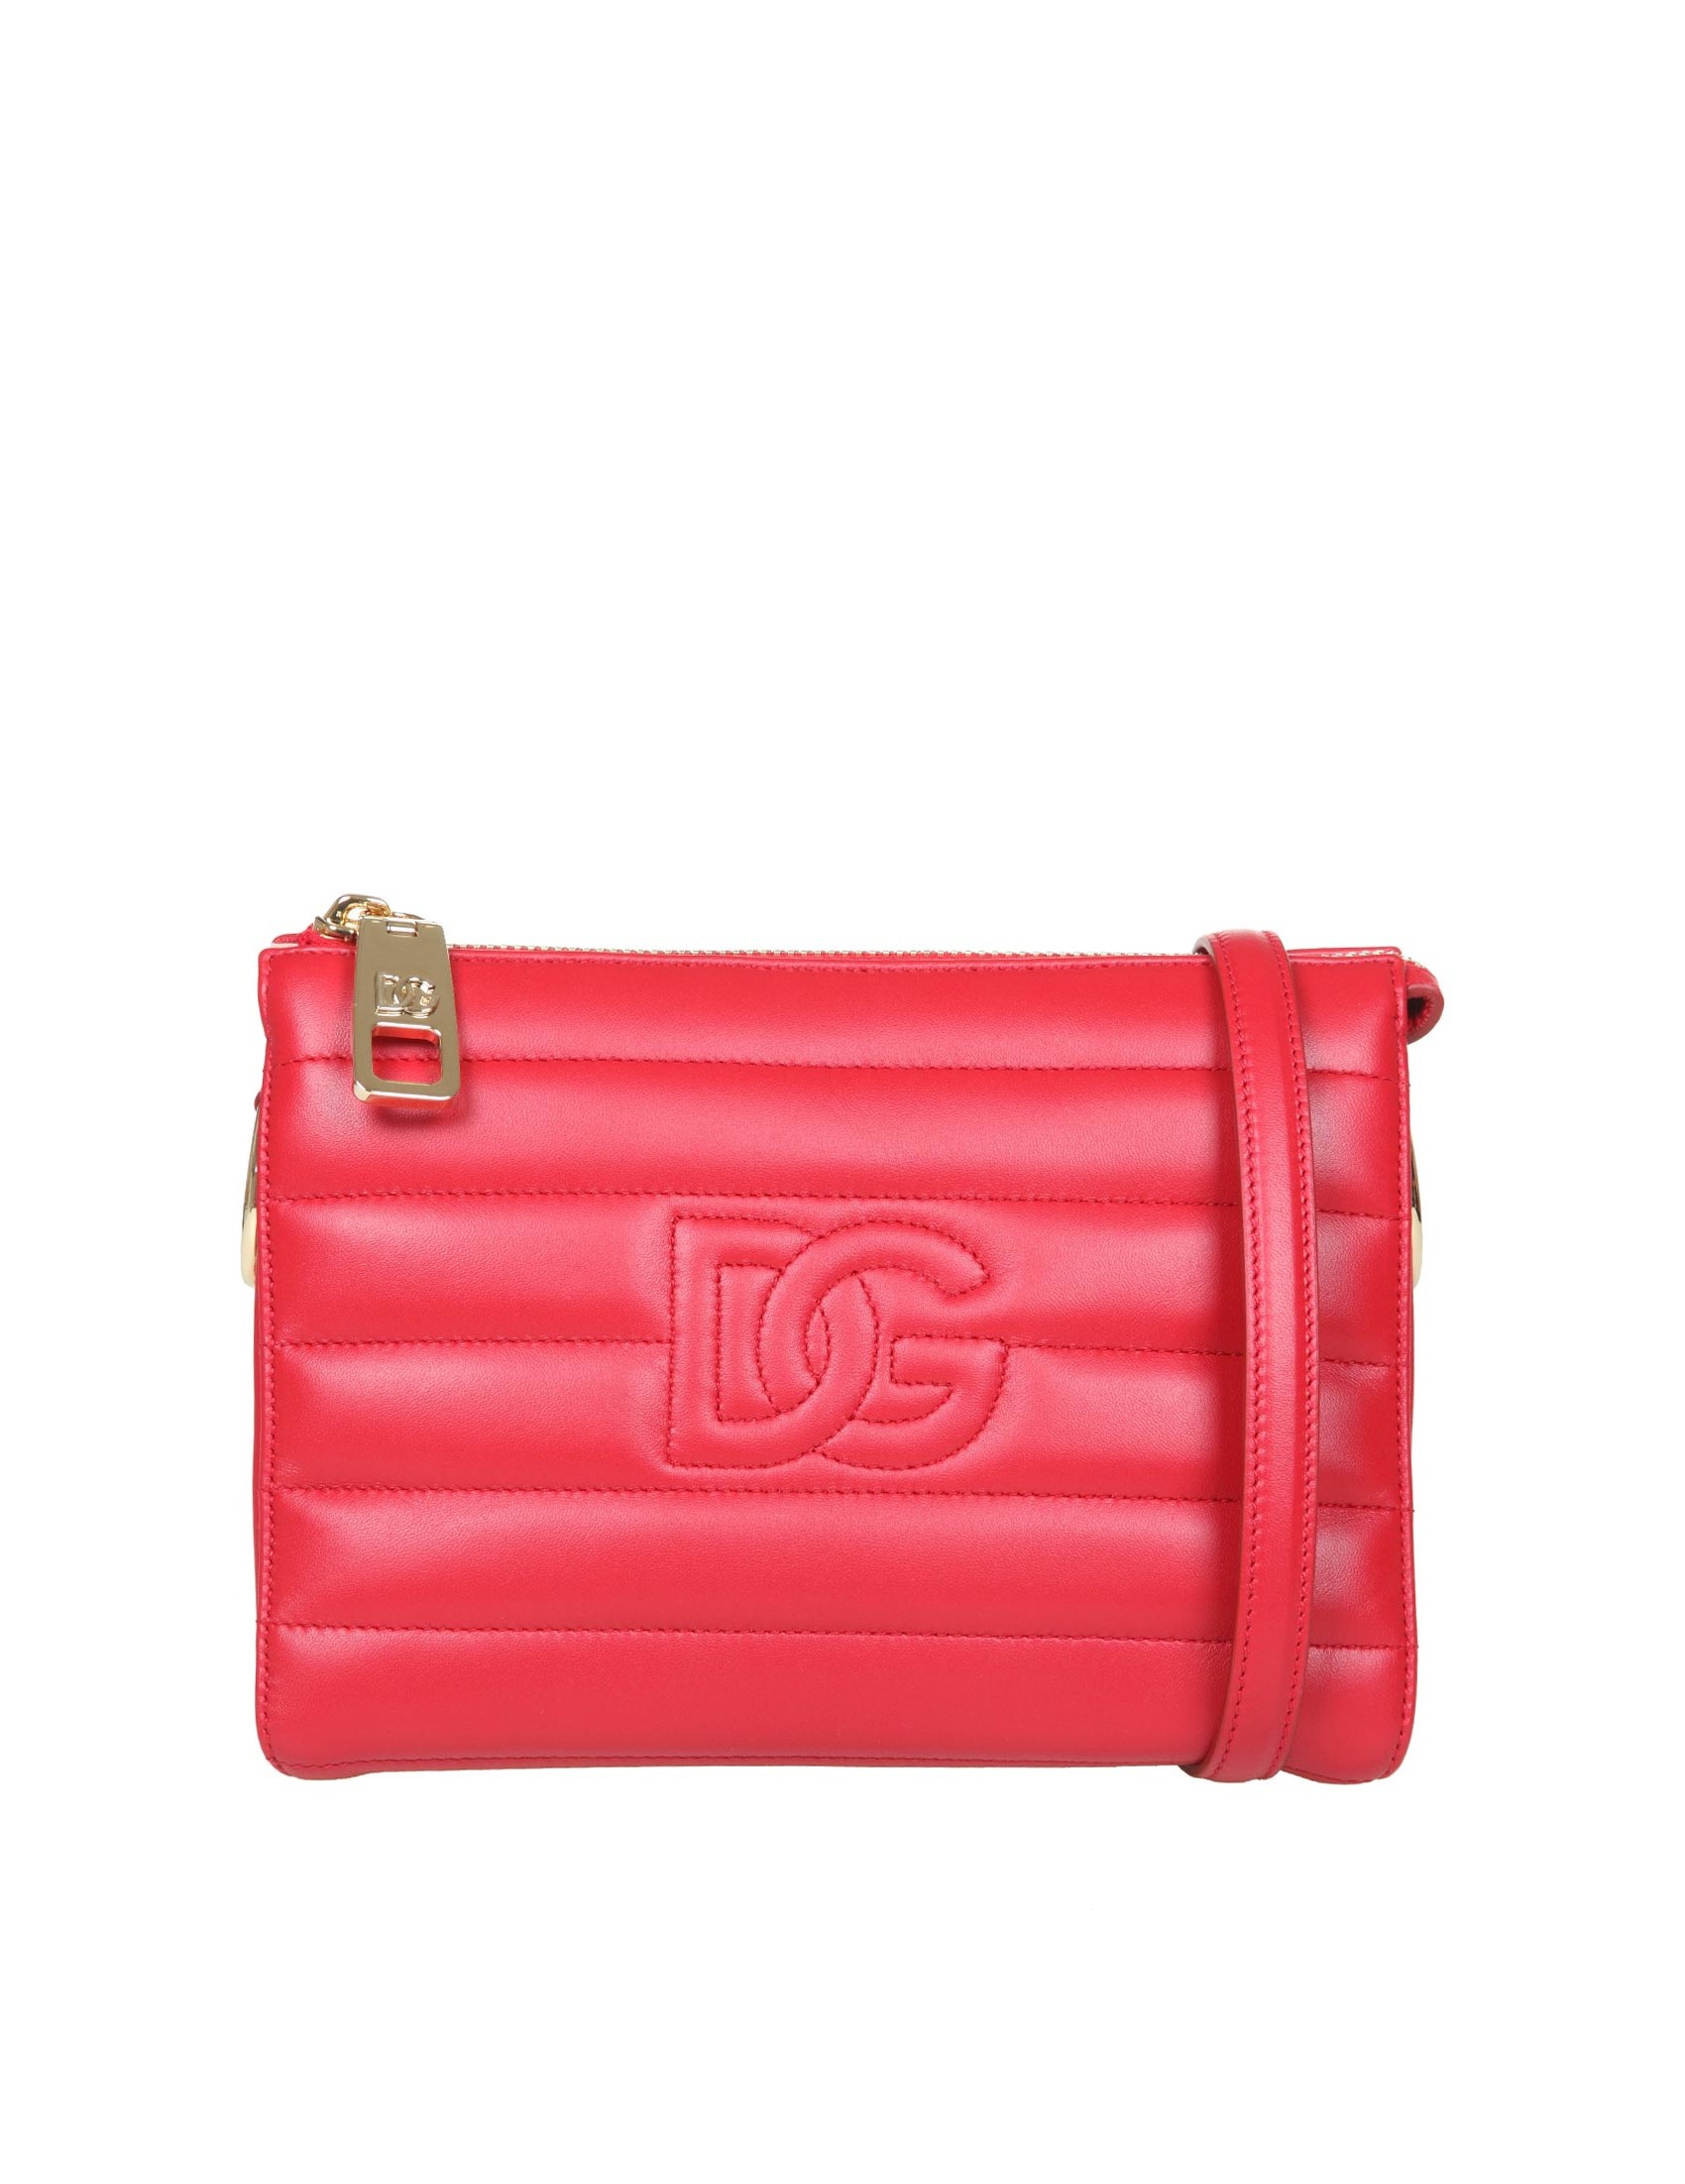 DOLCE & GABBANA BAG IN QUILTED CALF LEATHER